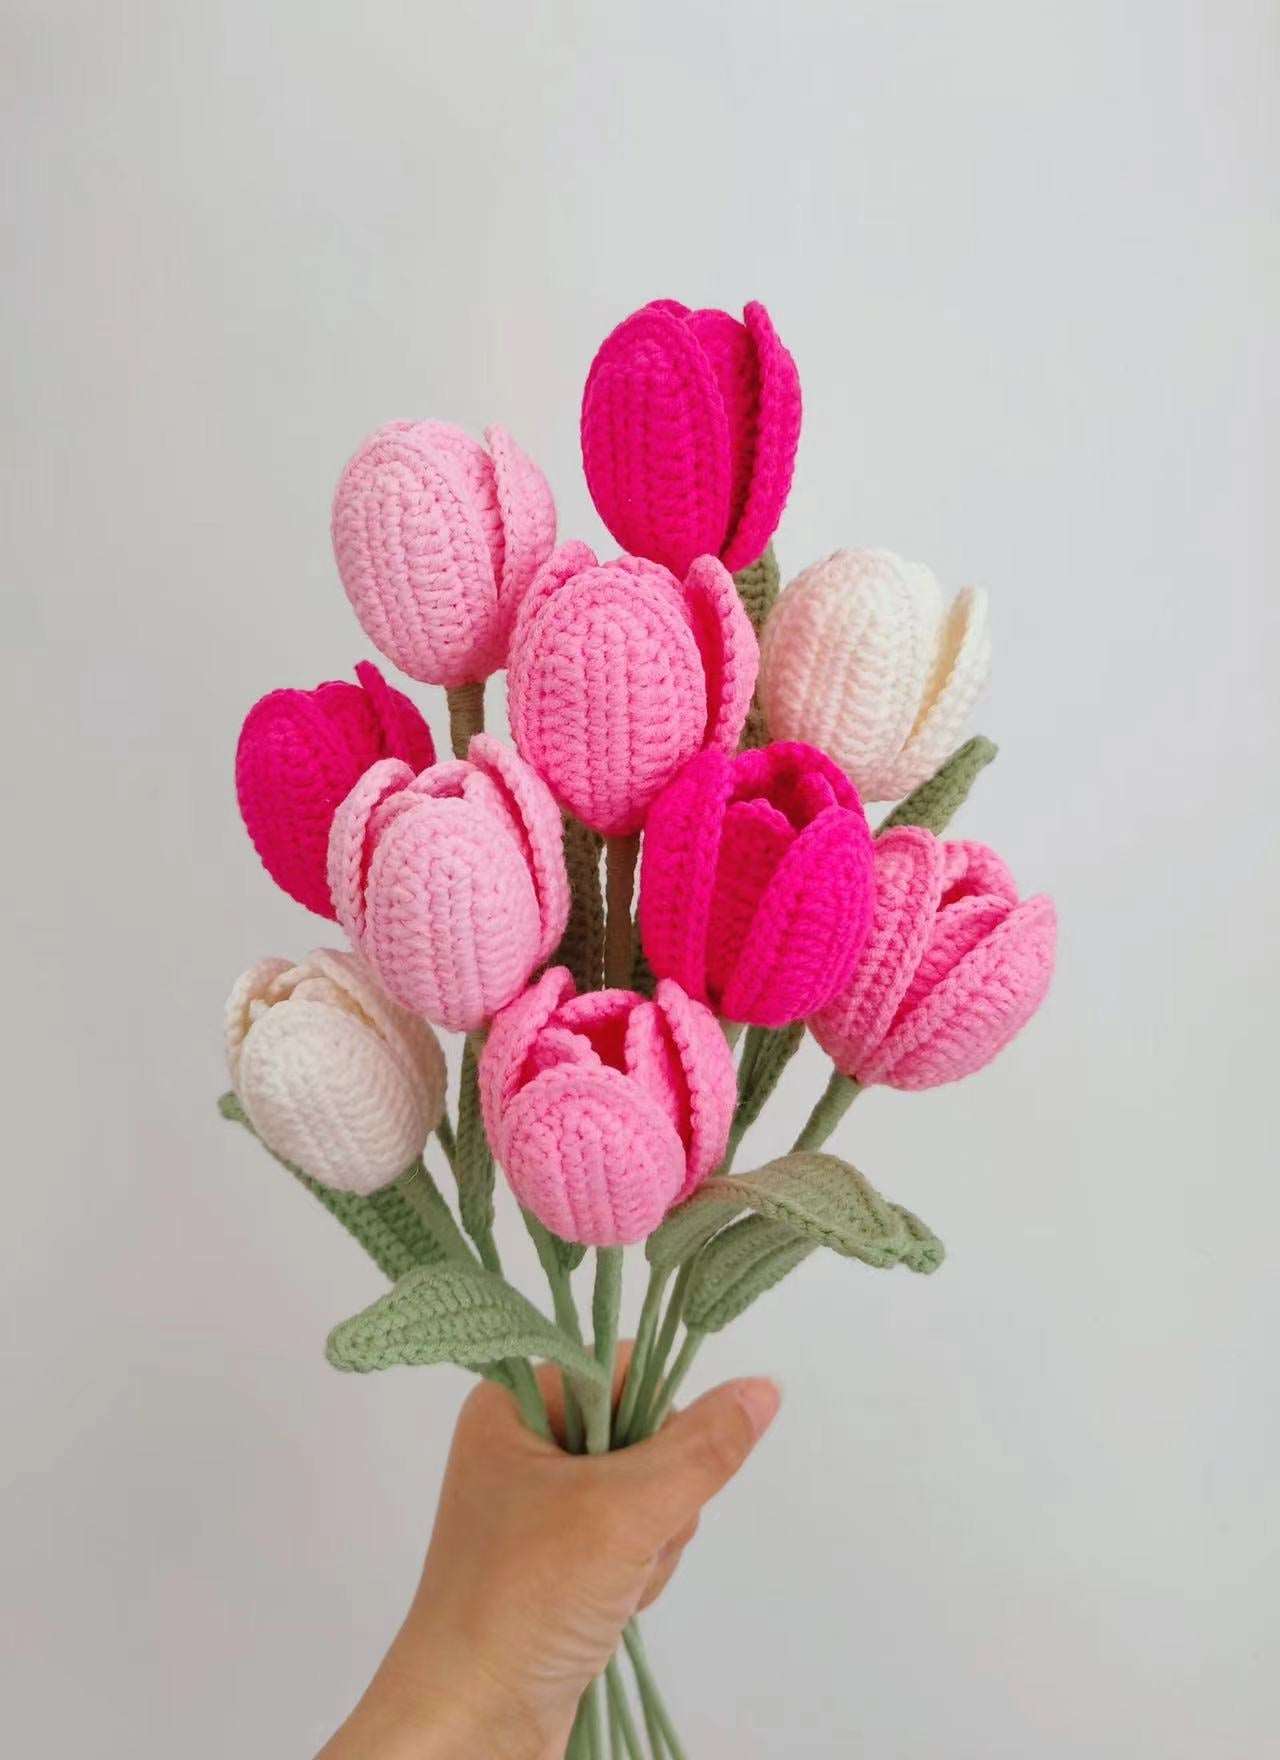 Handcrafted Crochet Tulip Bouquet with Colorful Options